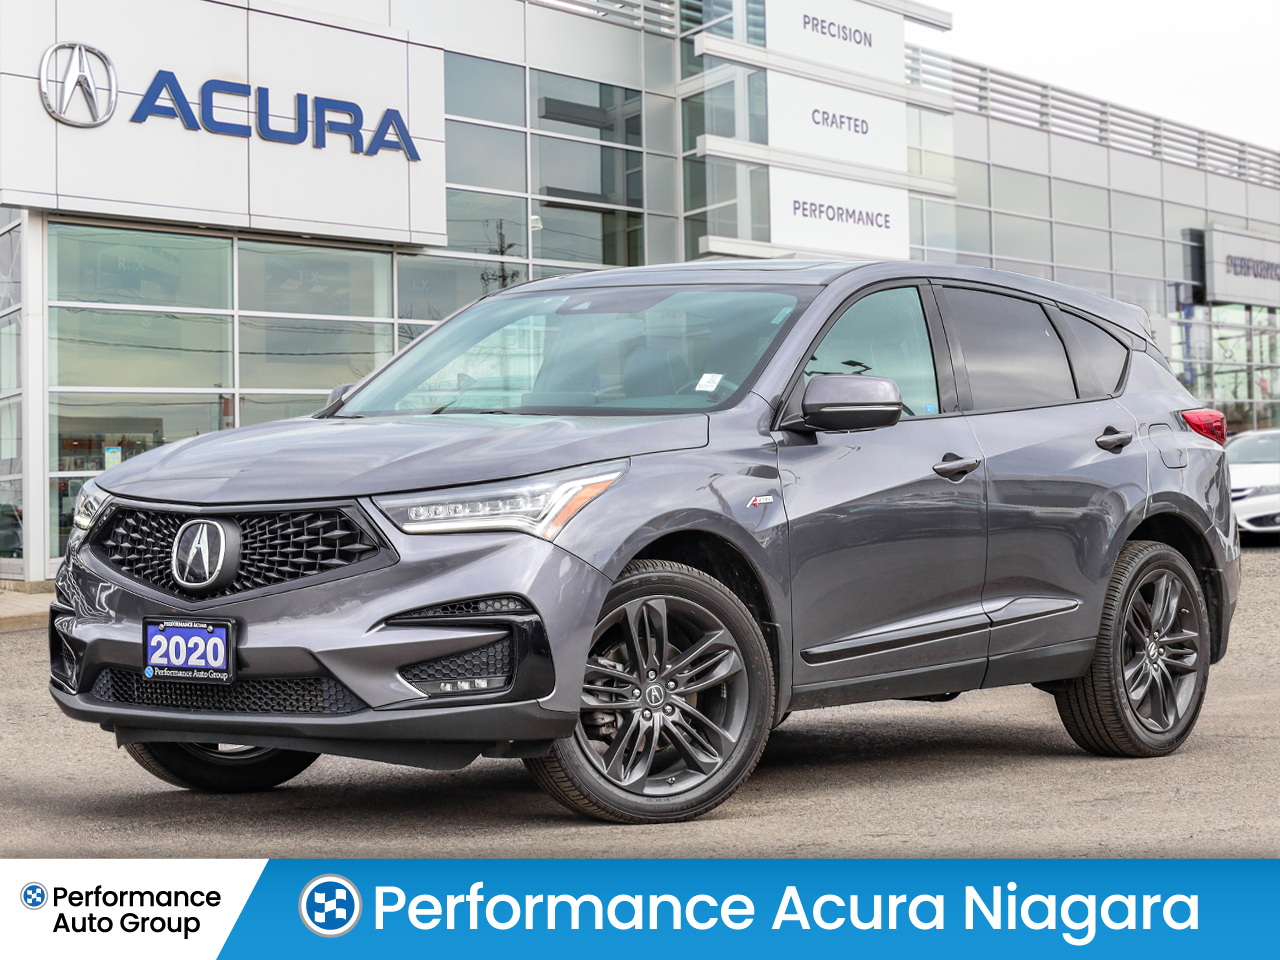 2020 Acura RDX SOLD - PENDING DELIVERY